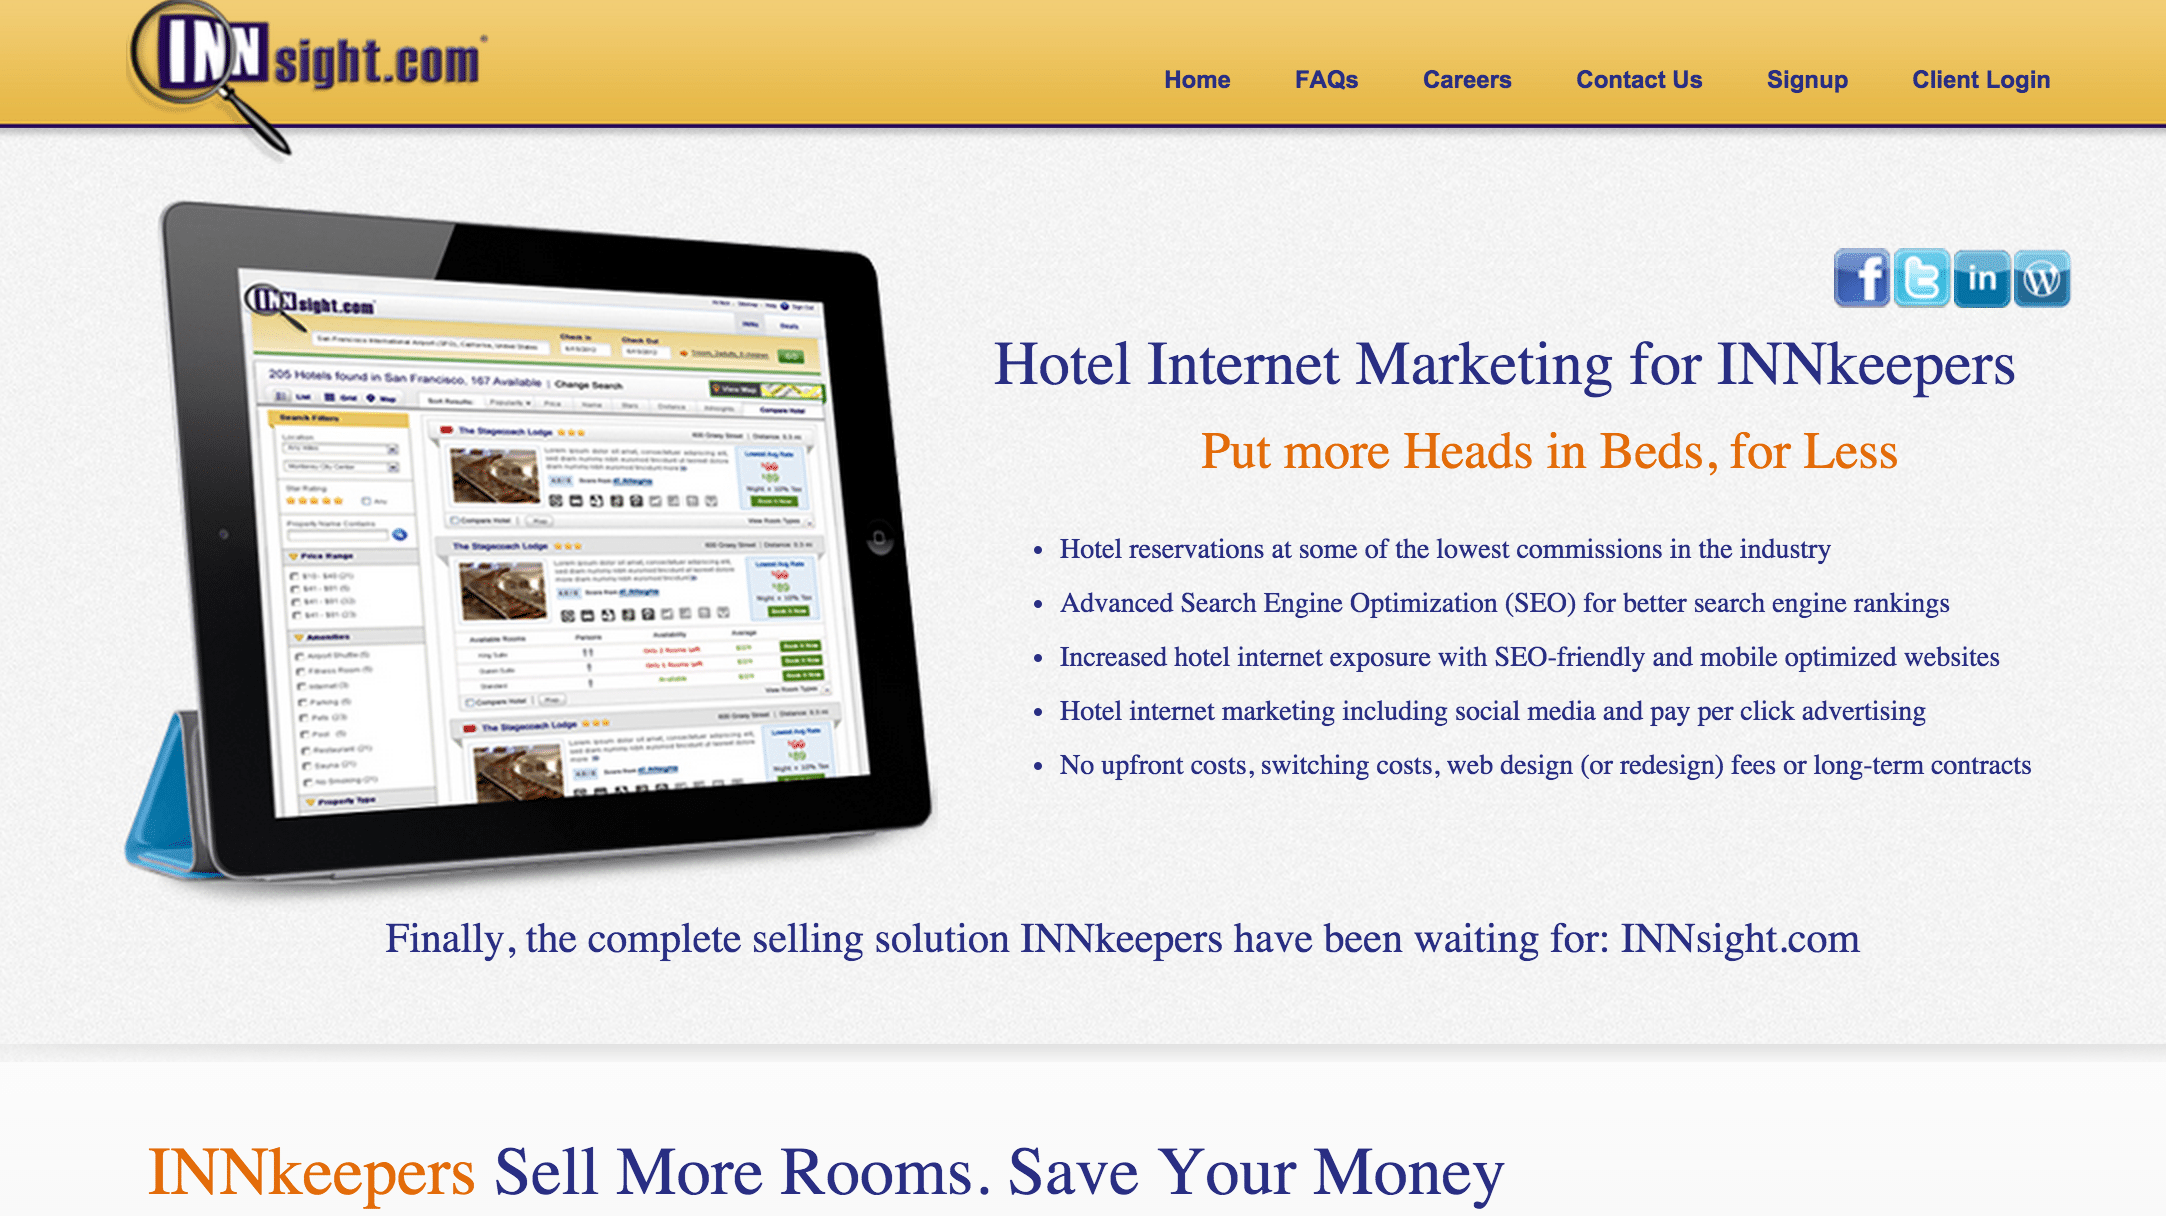 INNsight lets innkeepers sell and market their accommodations and fill their rooms with guests at lower costs. 